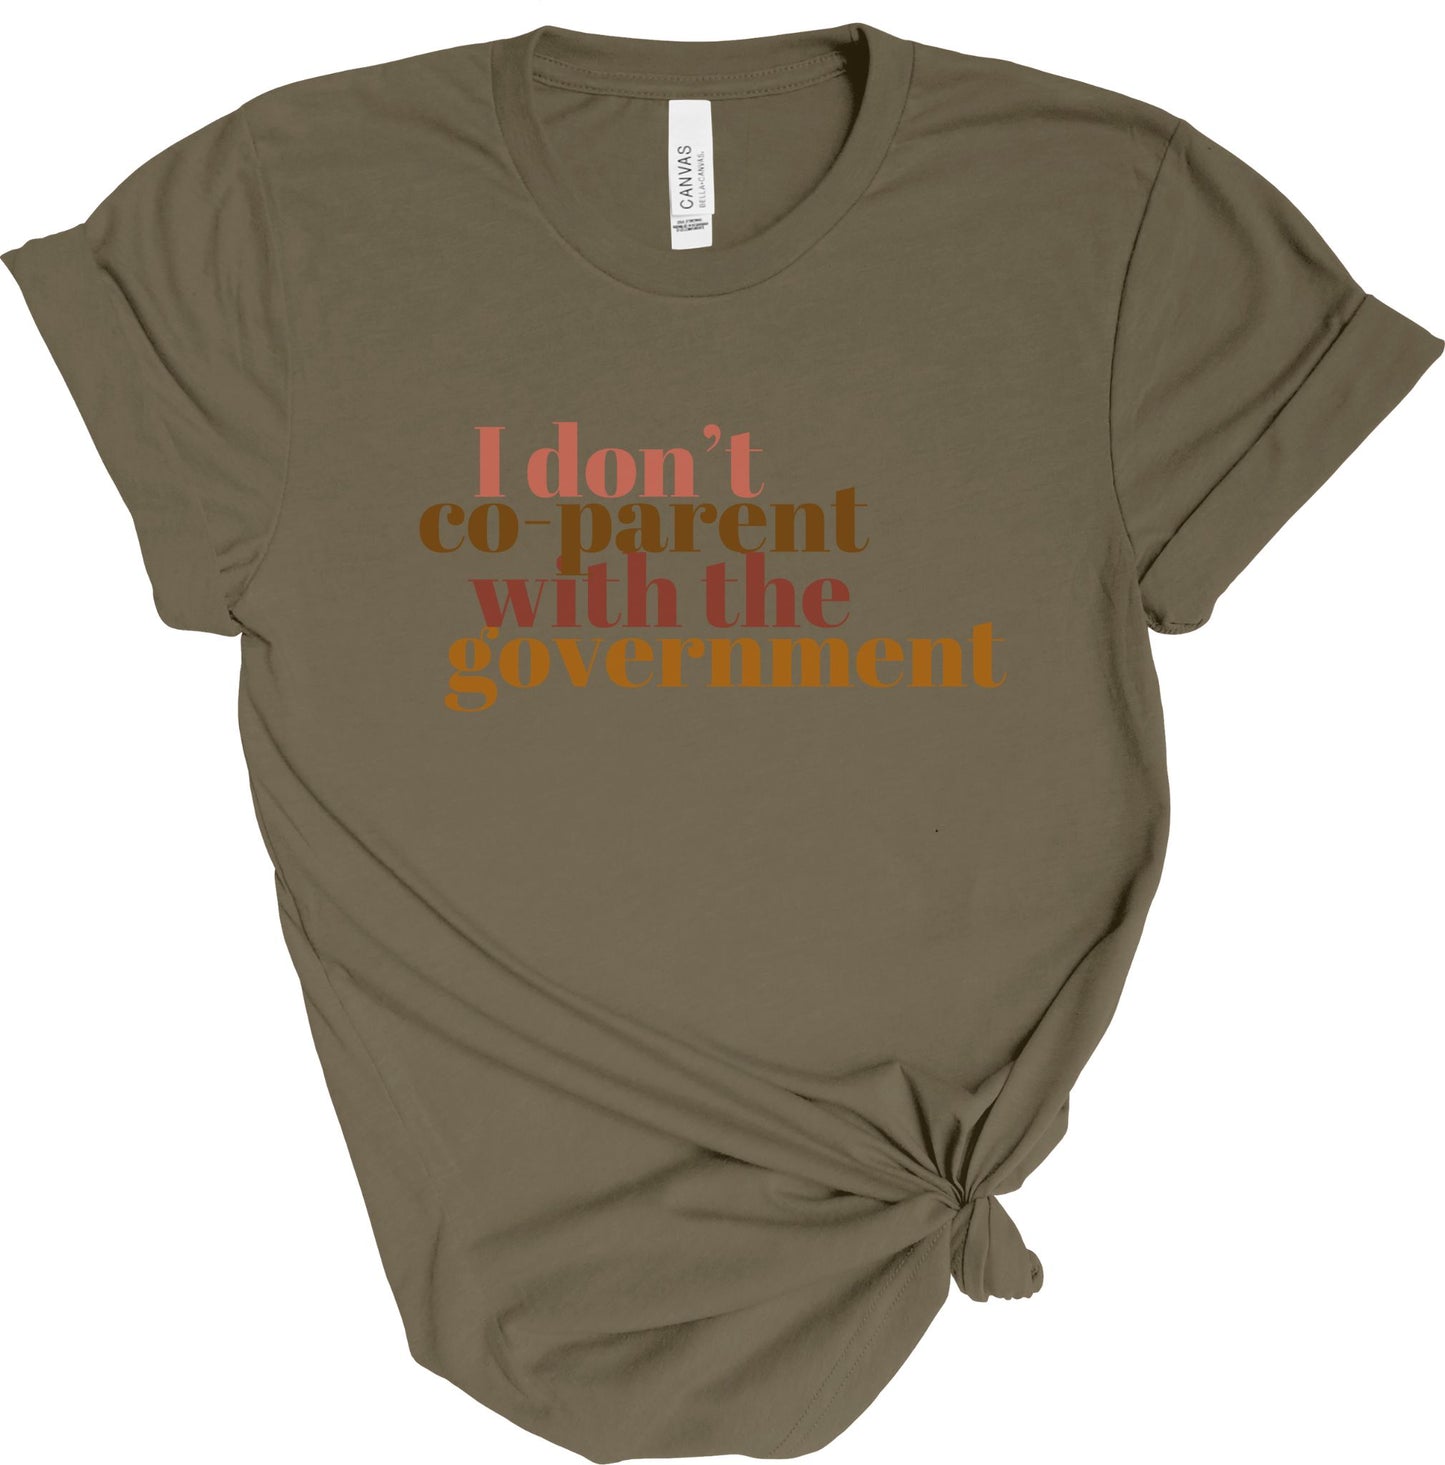 I DON'T CO-PARENT WITH THE GOVERNMENT TEE